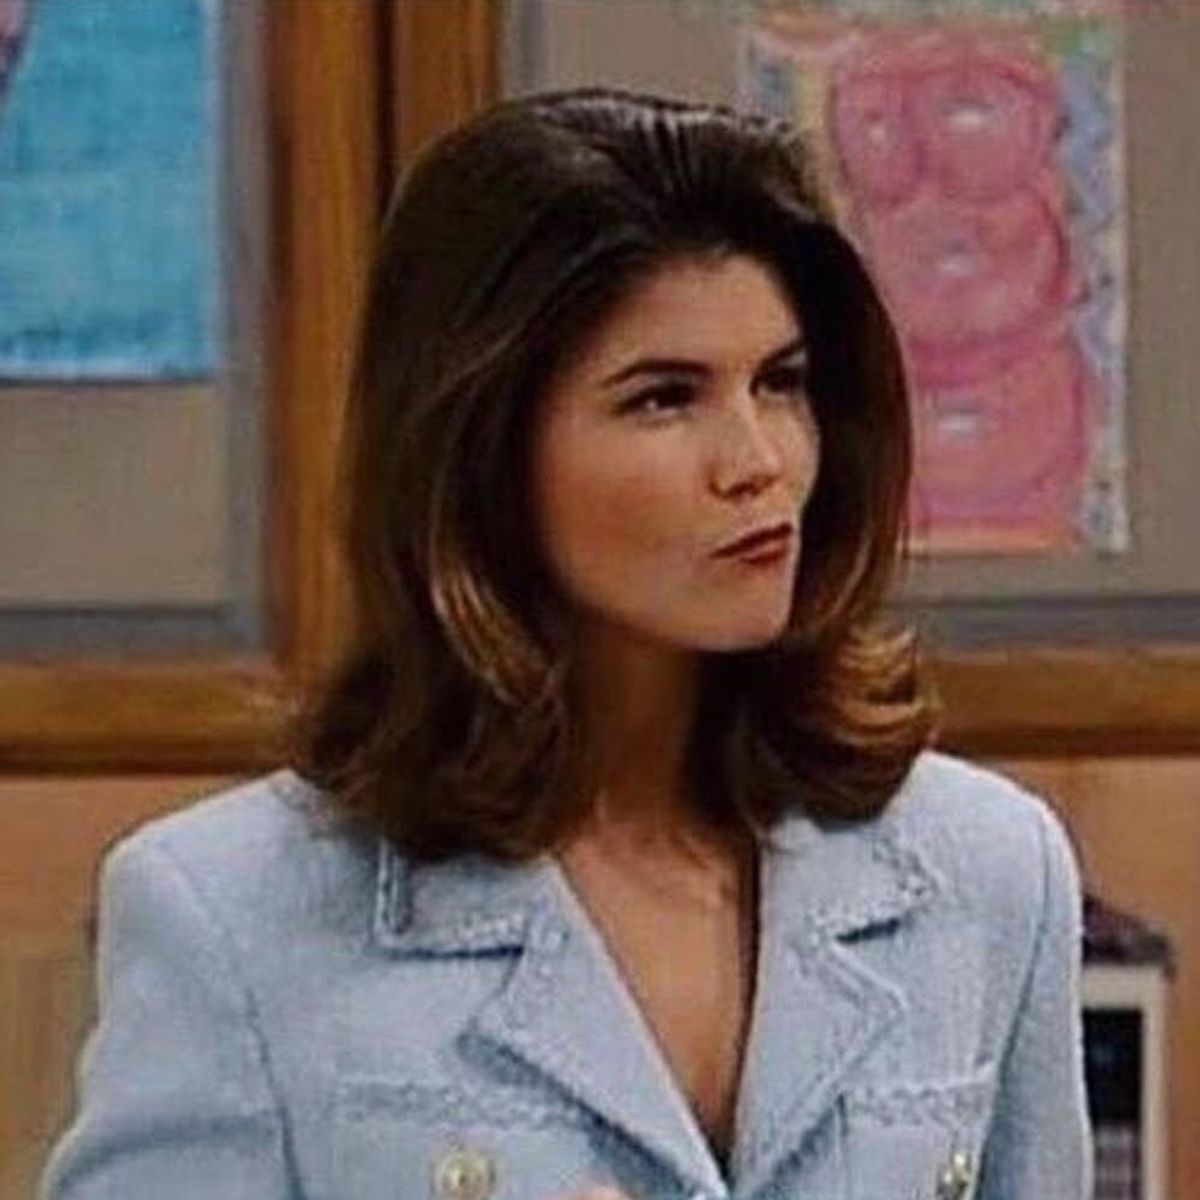 Lori Loughlin + More Celebs Hilariously Deny Being “Becky With the Good Hair”